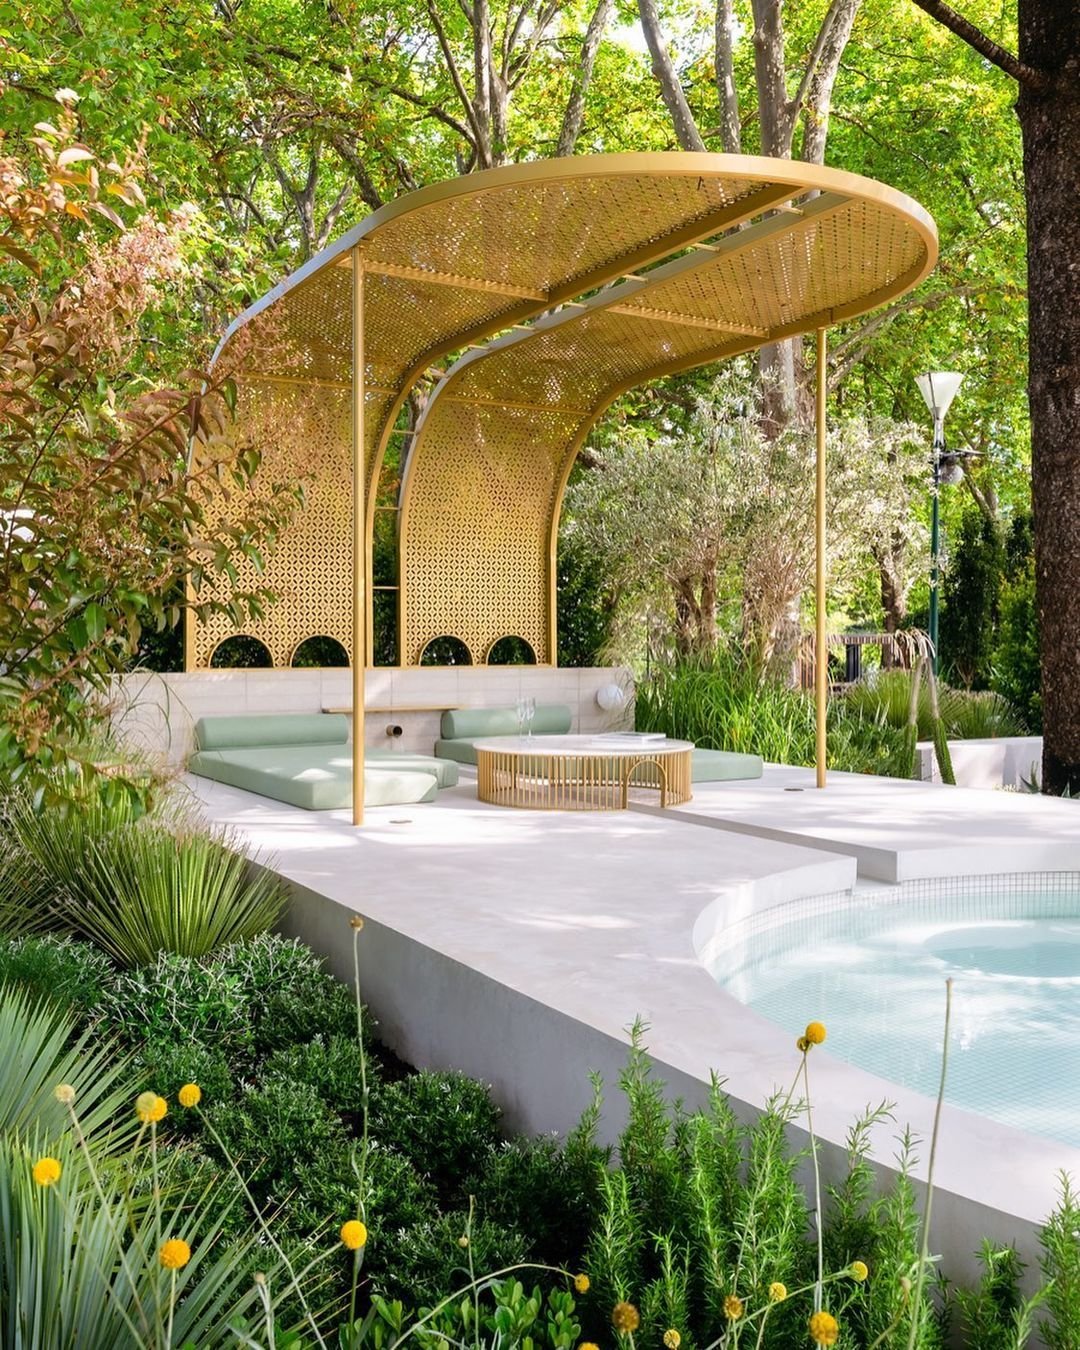 Mint Design's gold medal winning Show Garden boasted X-Bond, which was installed in the pool and surrounding areas. #CoverItWithXBONDPhotography @erikholtphotographyGarden design @mintdesignauGarden build @tlc_pools.jpg